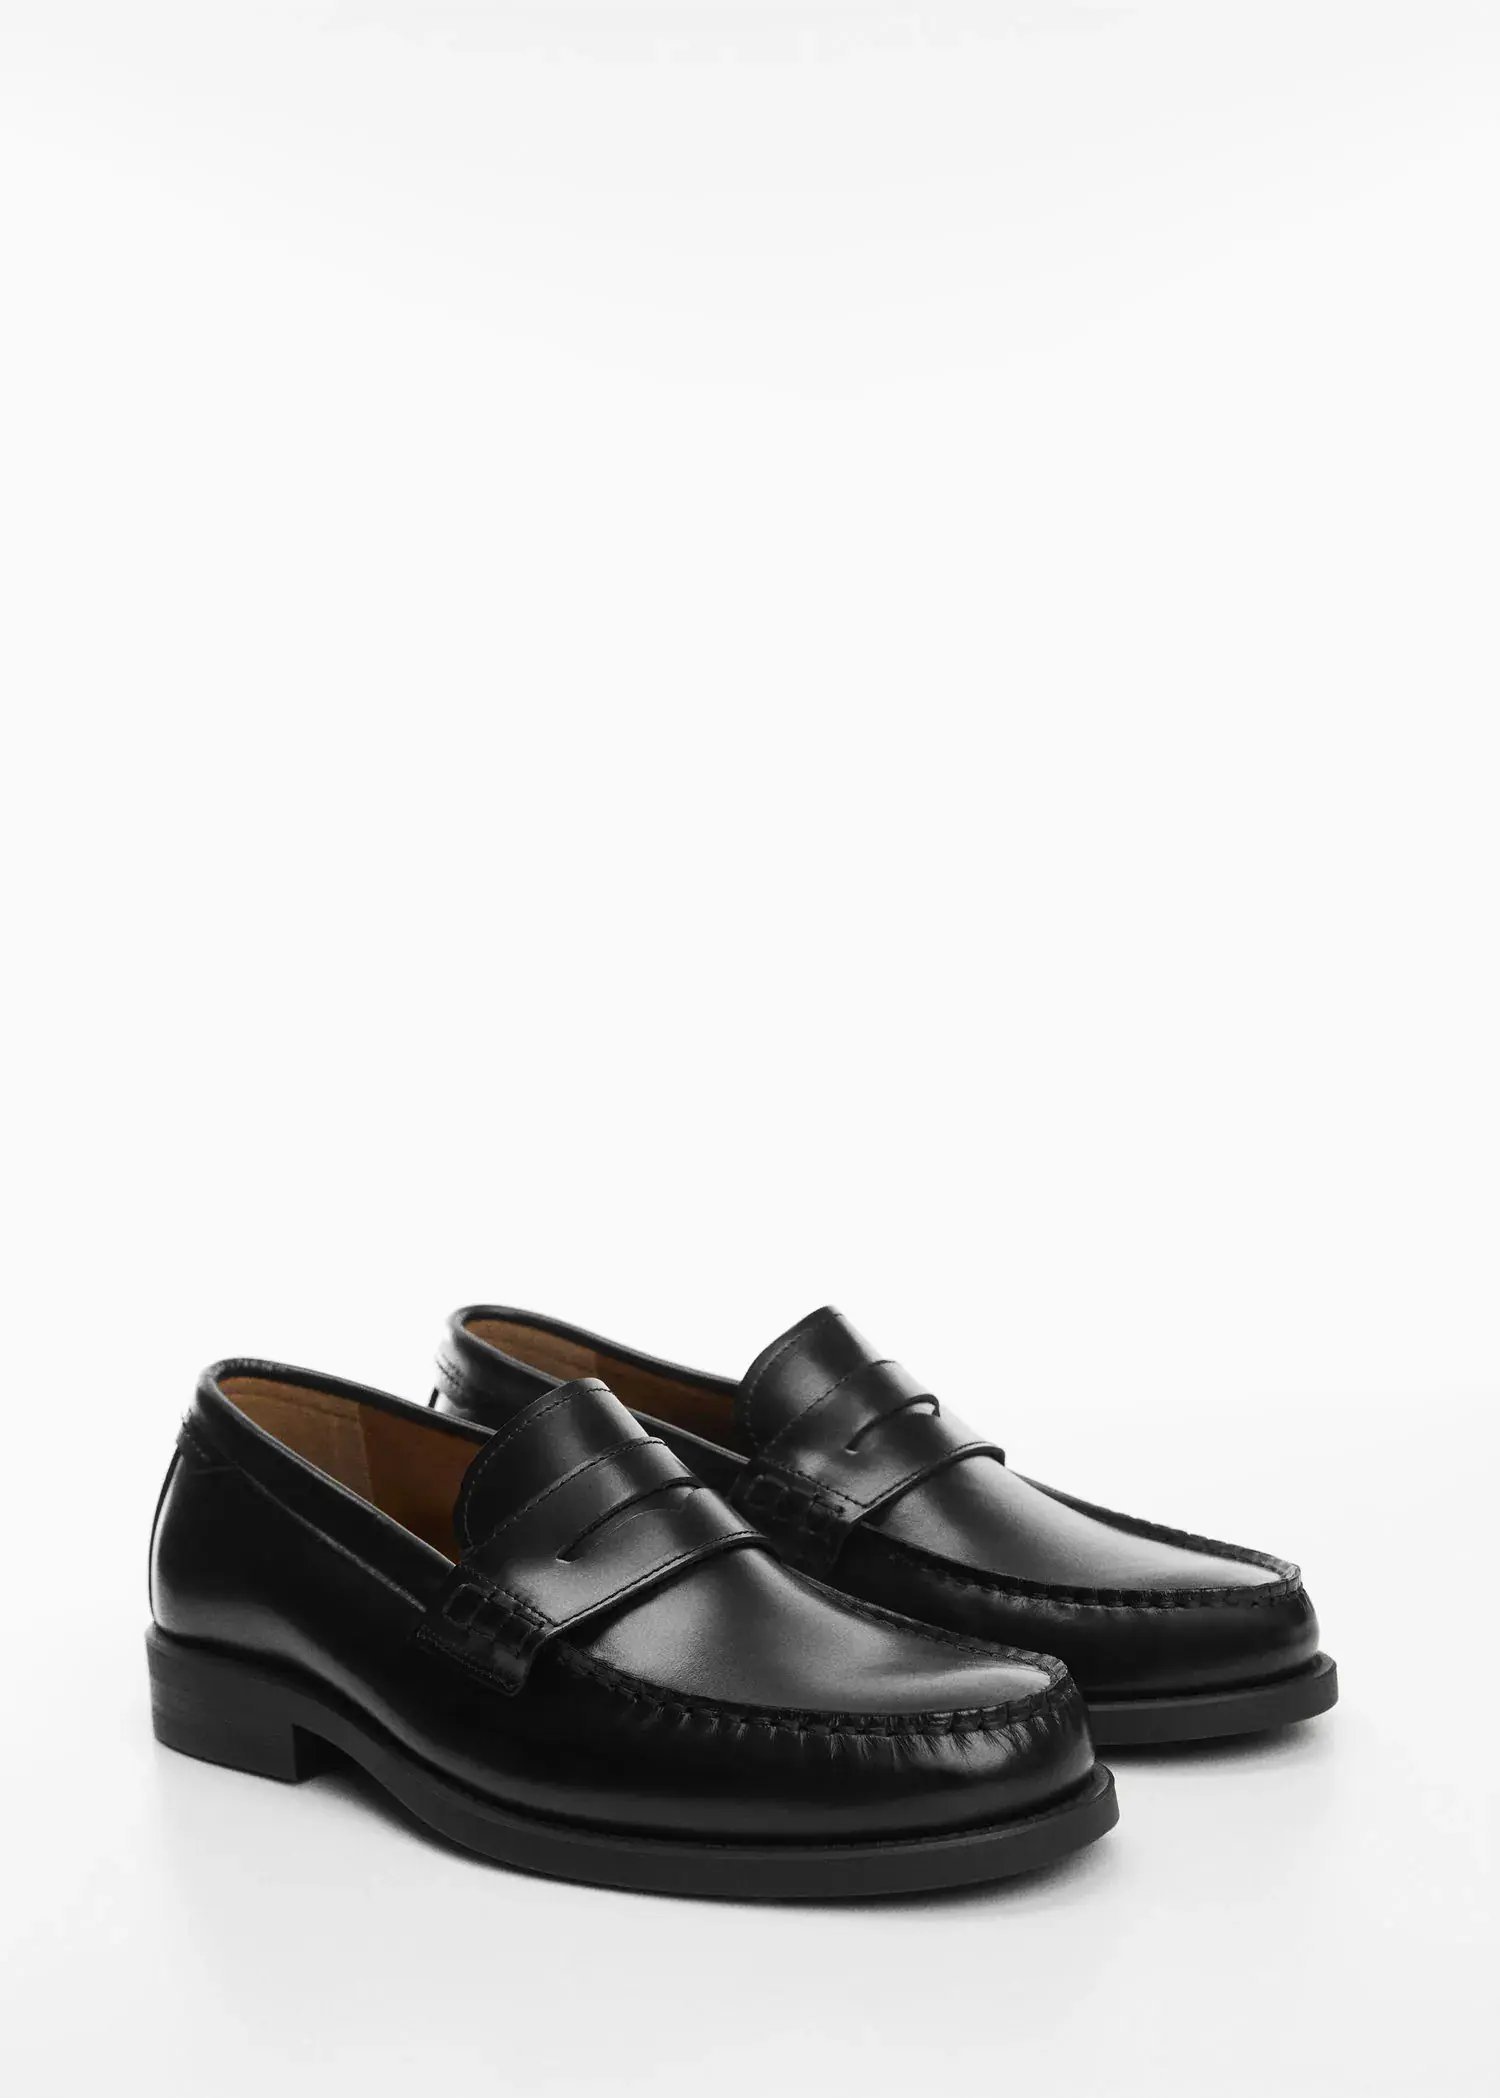 Mango Aged-leather loafers. 2